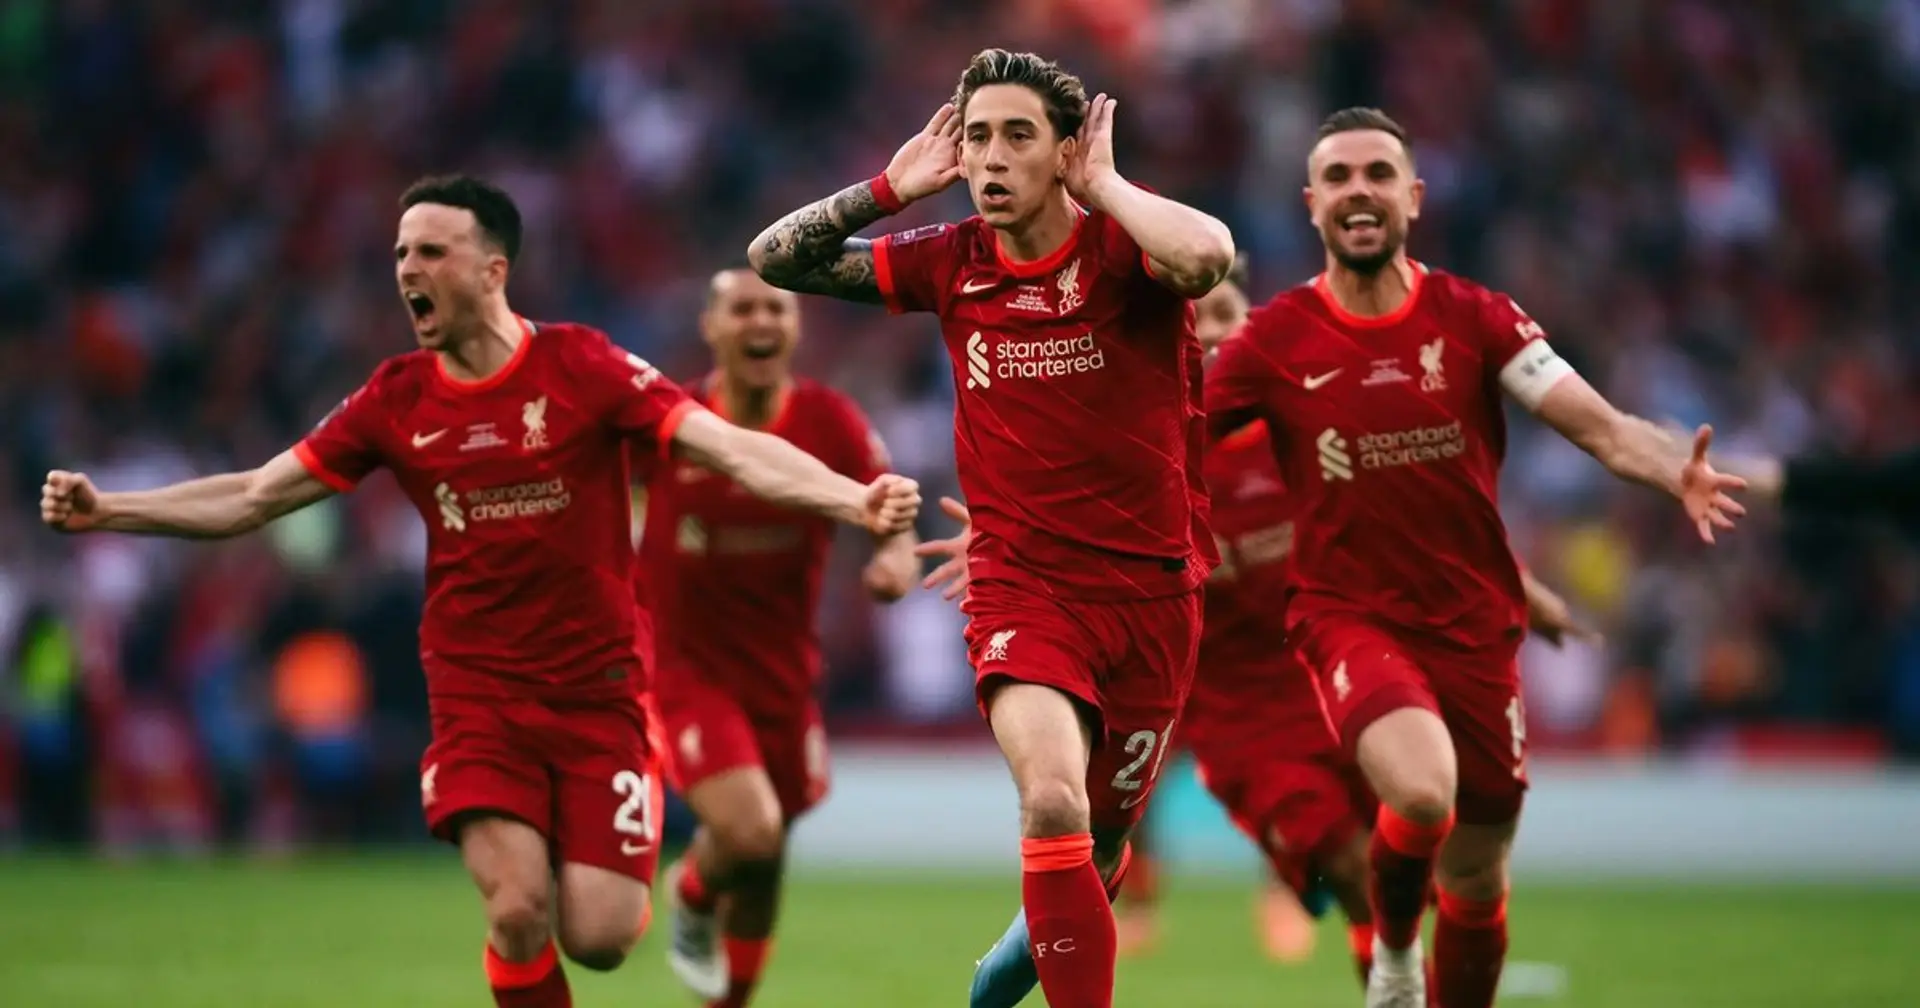 4 best Tsimikas pictures as Greek Scouser wins FA Cup for Liverpool